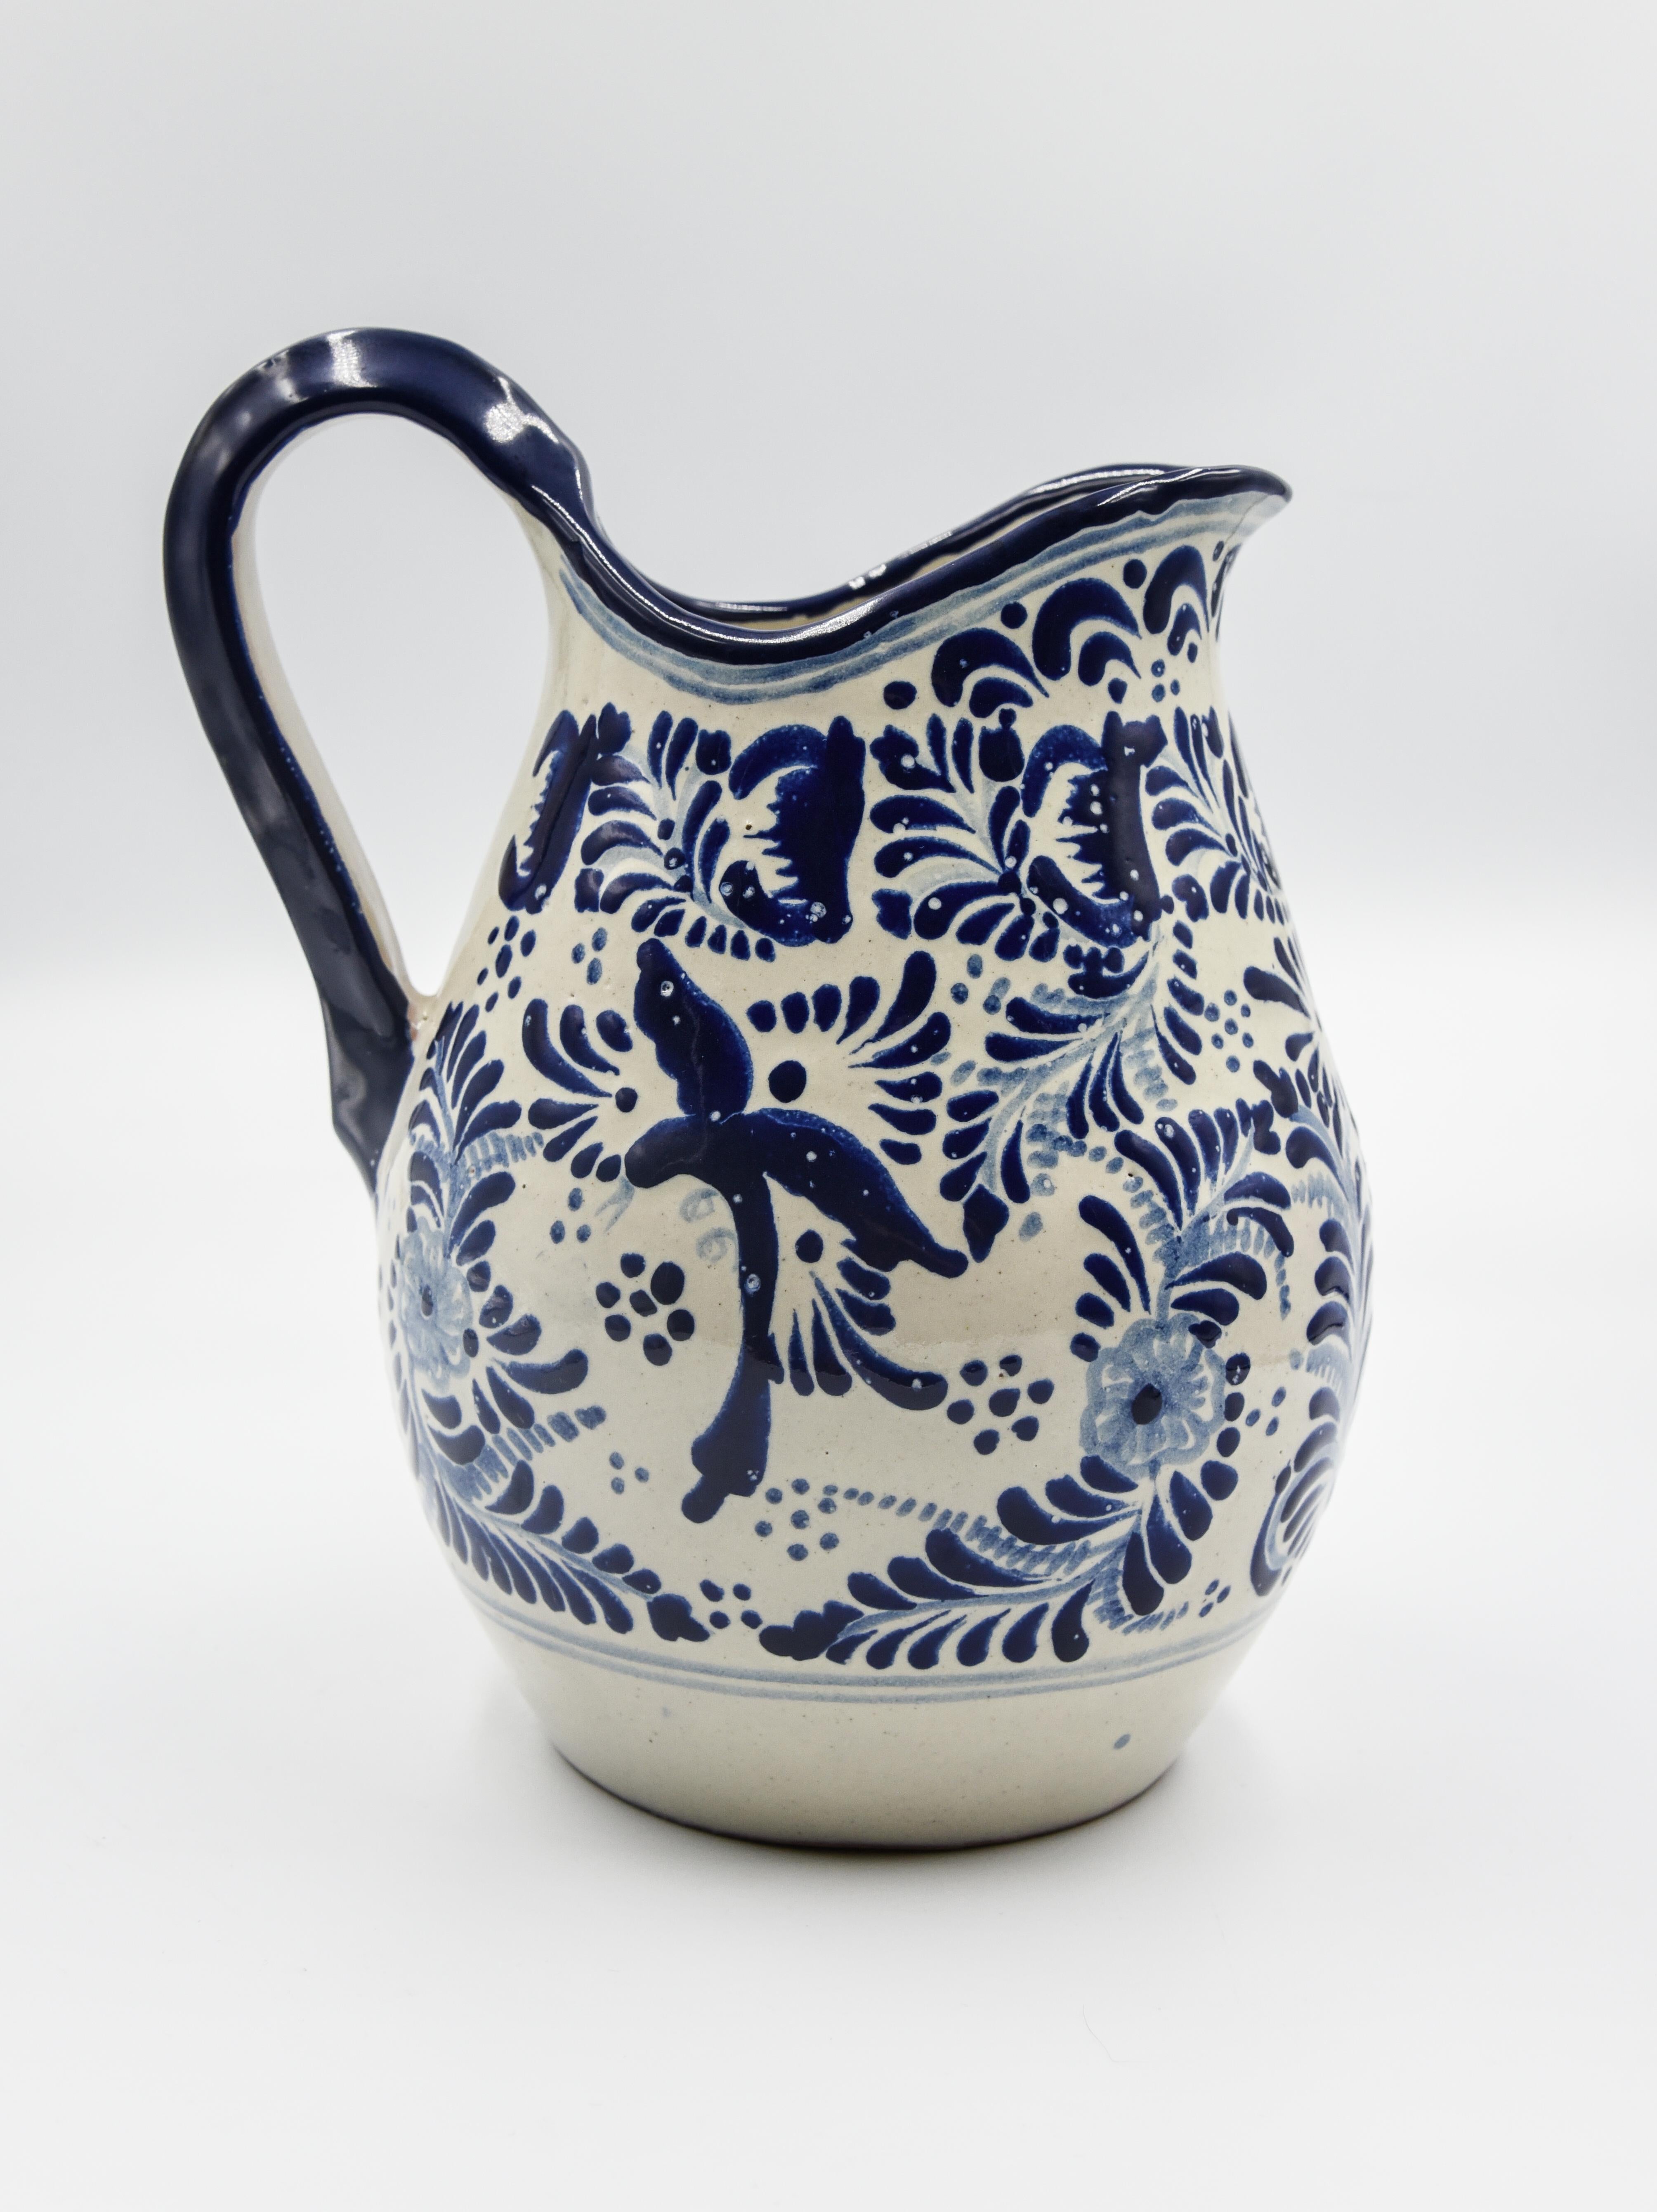 This elegant blue and white pitcher is made of Talavera. Perfect for a decorative piece or useful pitcher for the everyday life. Painted in a traditional poblano style this beautiful vessel is perfect for the kitchen or dinning room. 

The